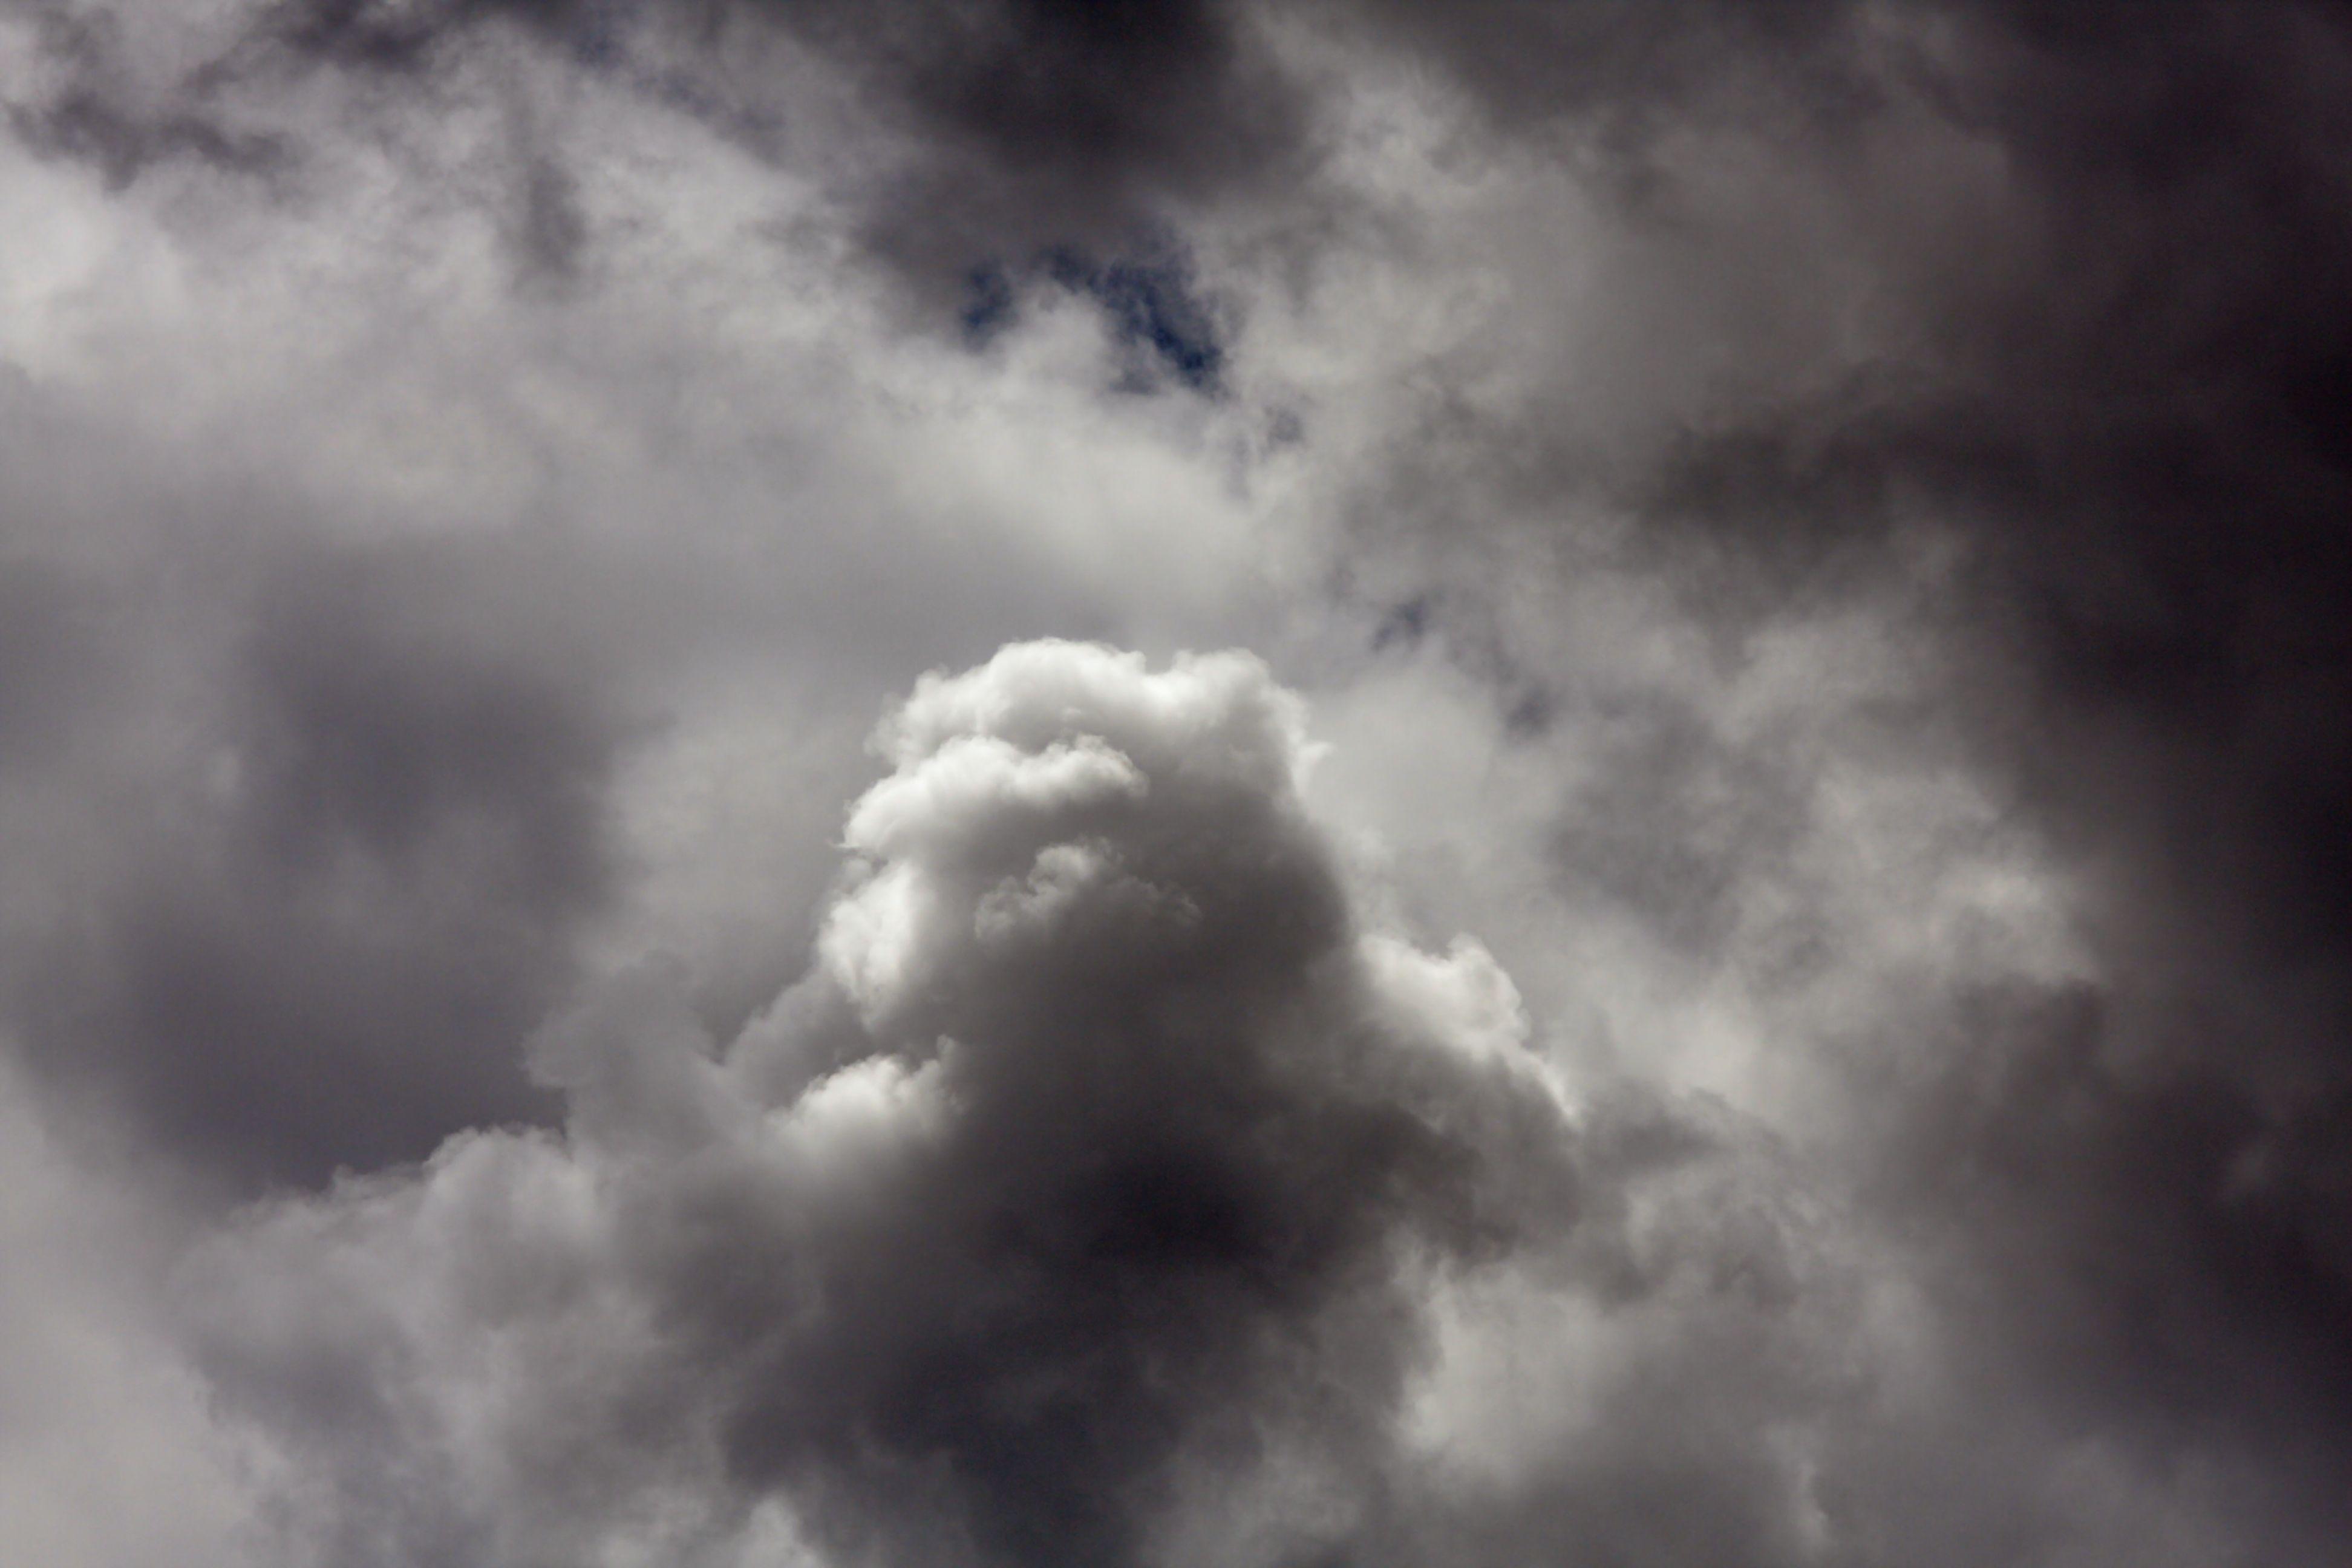 Seeing Animals in Clouds: The Cloud Eagle